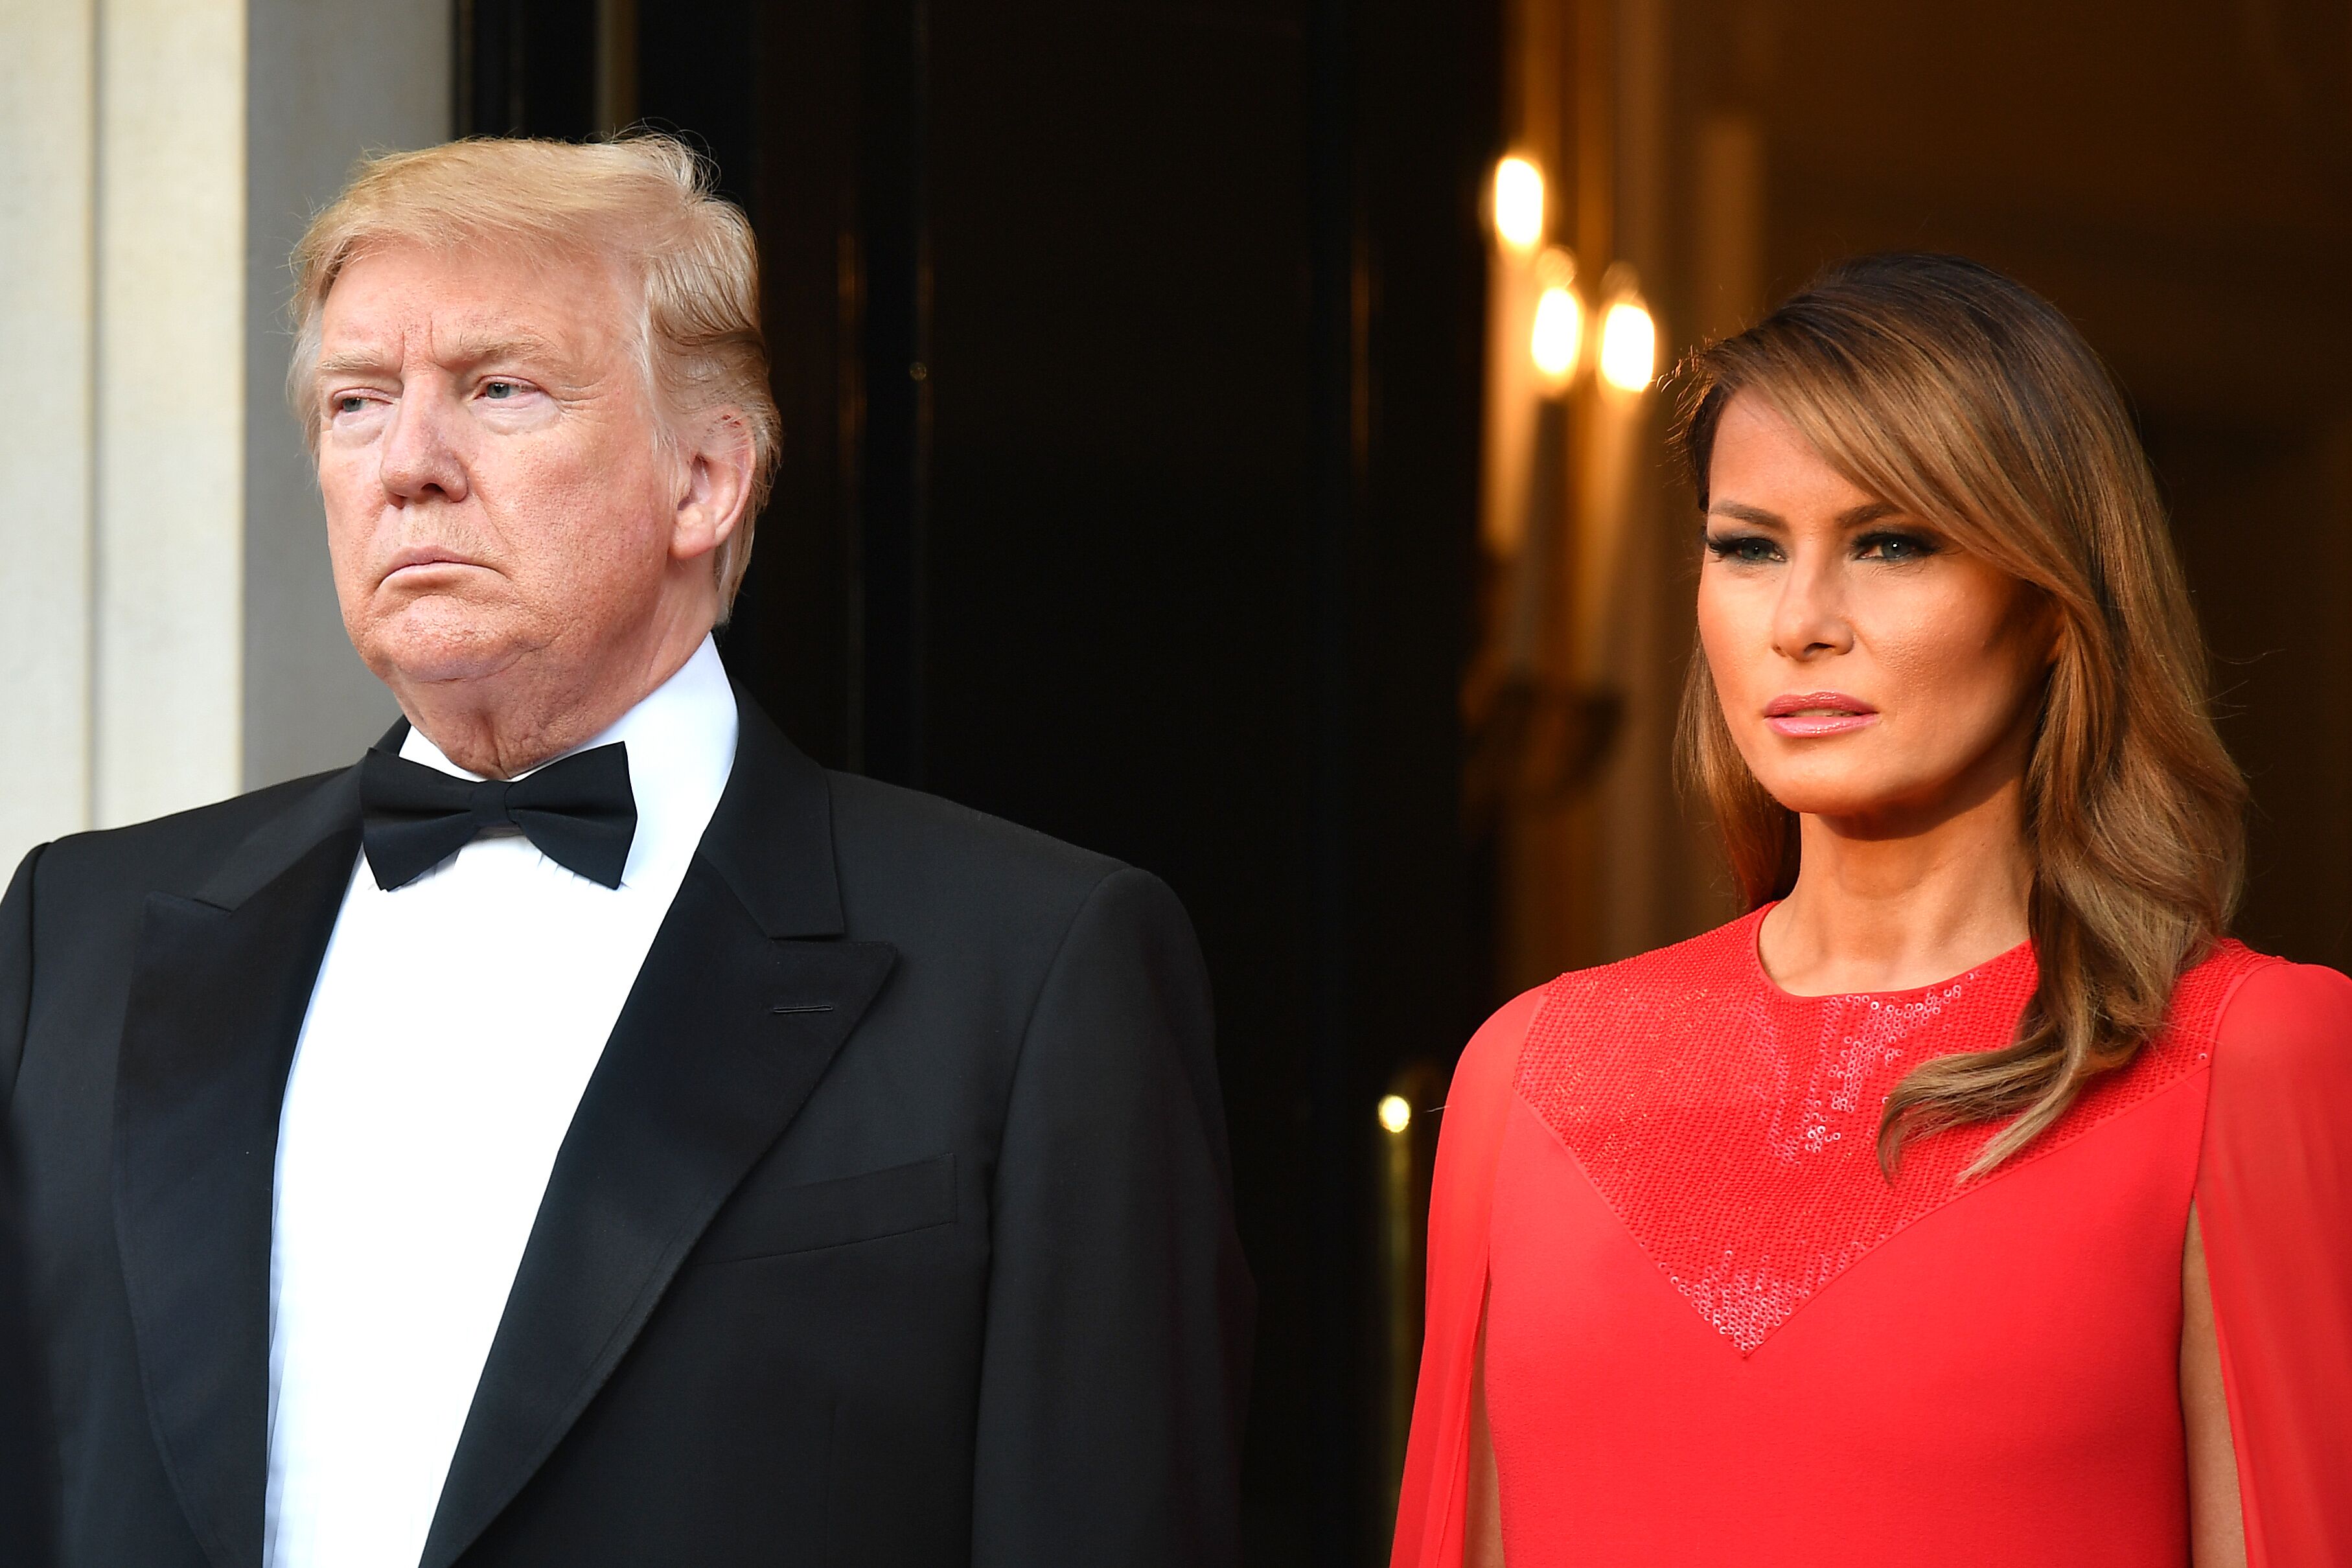 President Donald Trump and First Lady Melania Trump host a dinner at Winfield House during their state visit on June 4, 2019 in London, England. | Source: Getty Images